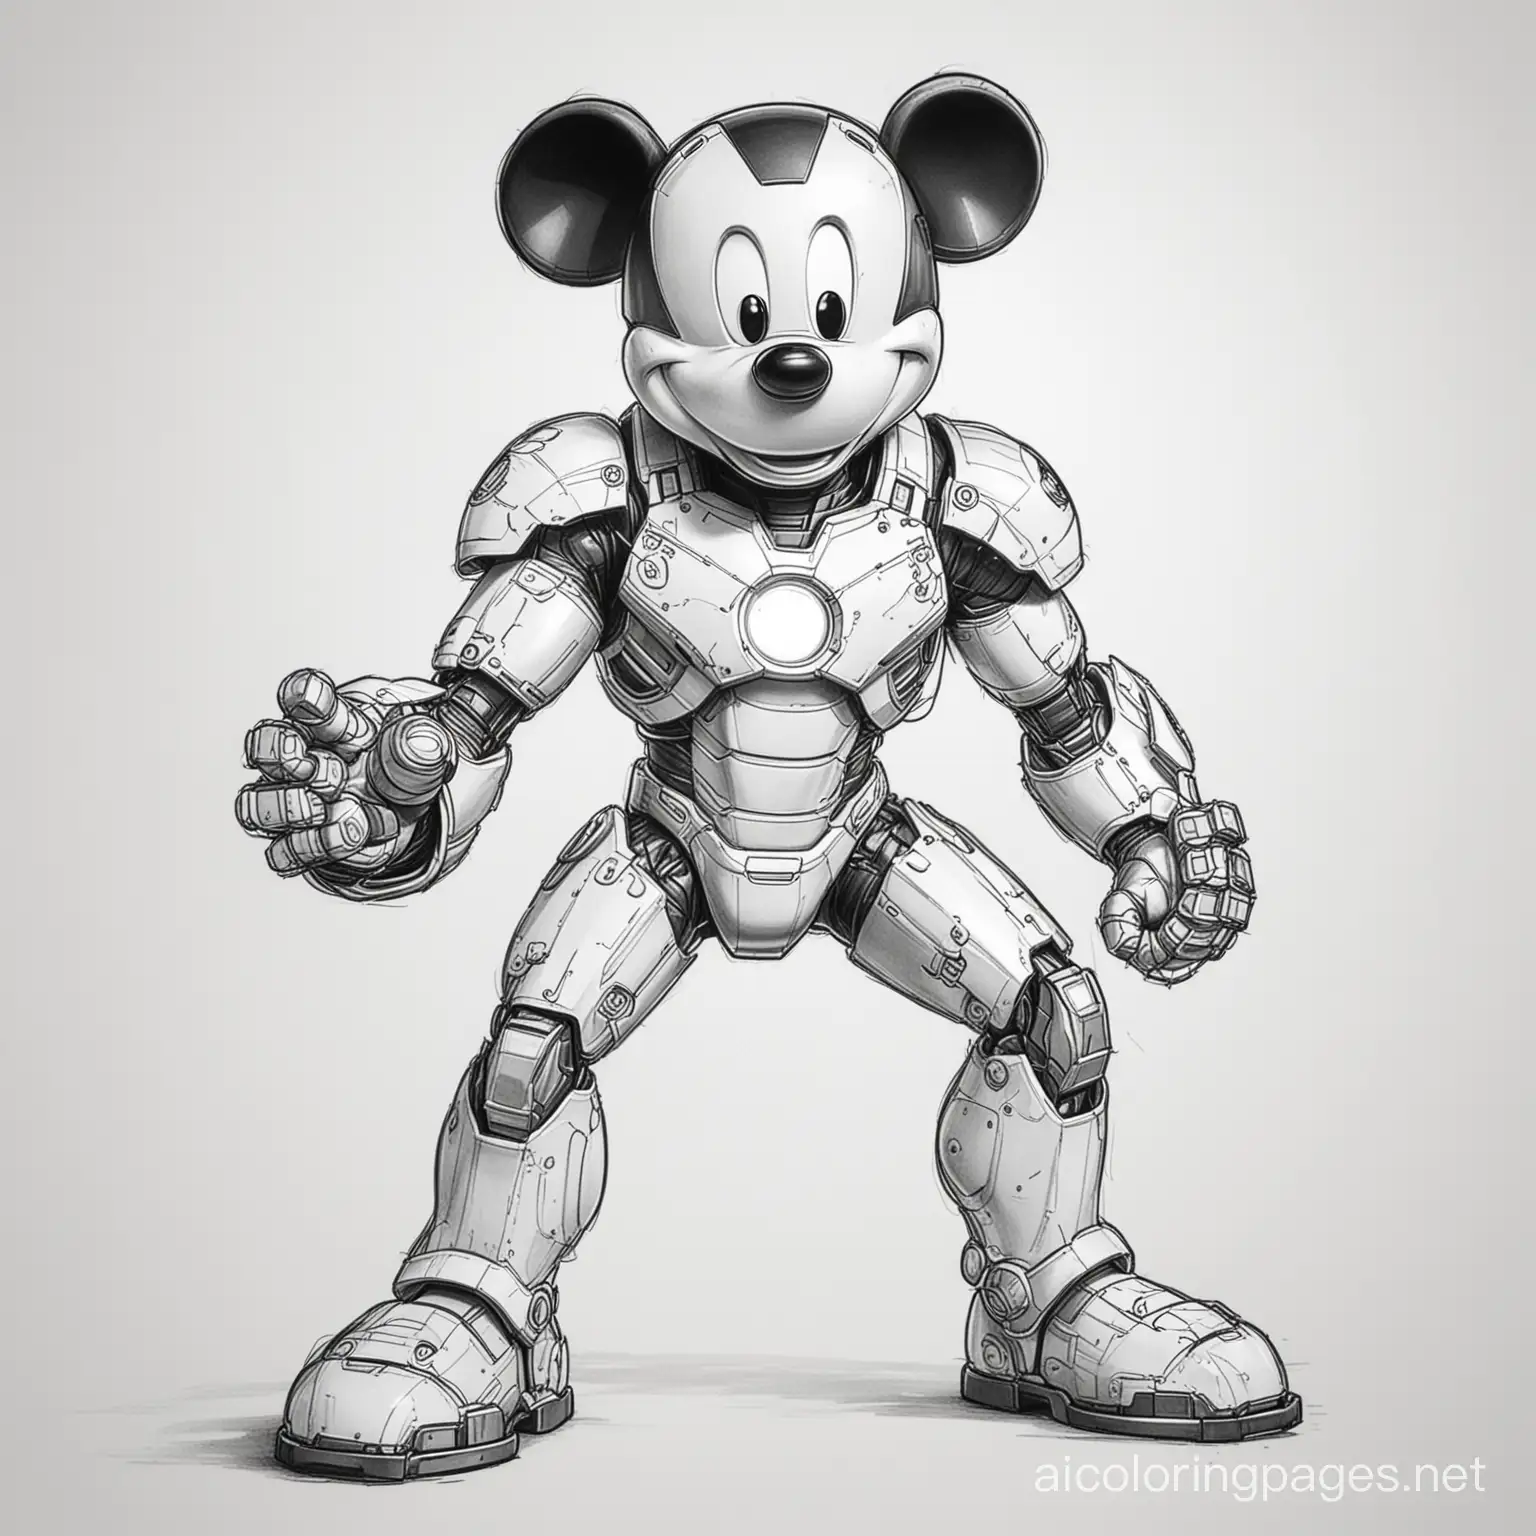 Mickey-Mouse-and-Iron-Man-Coloring-Page-for-Kids